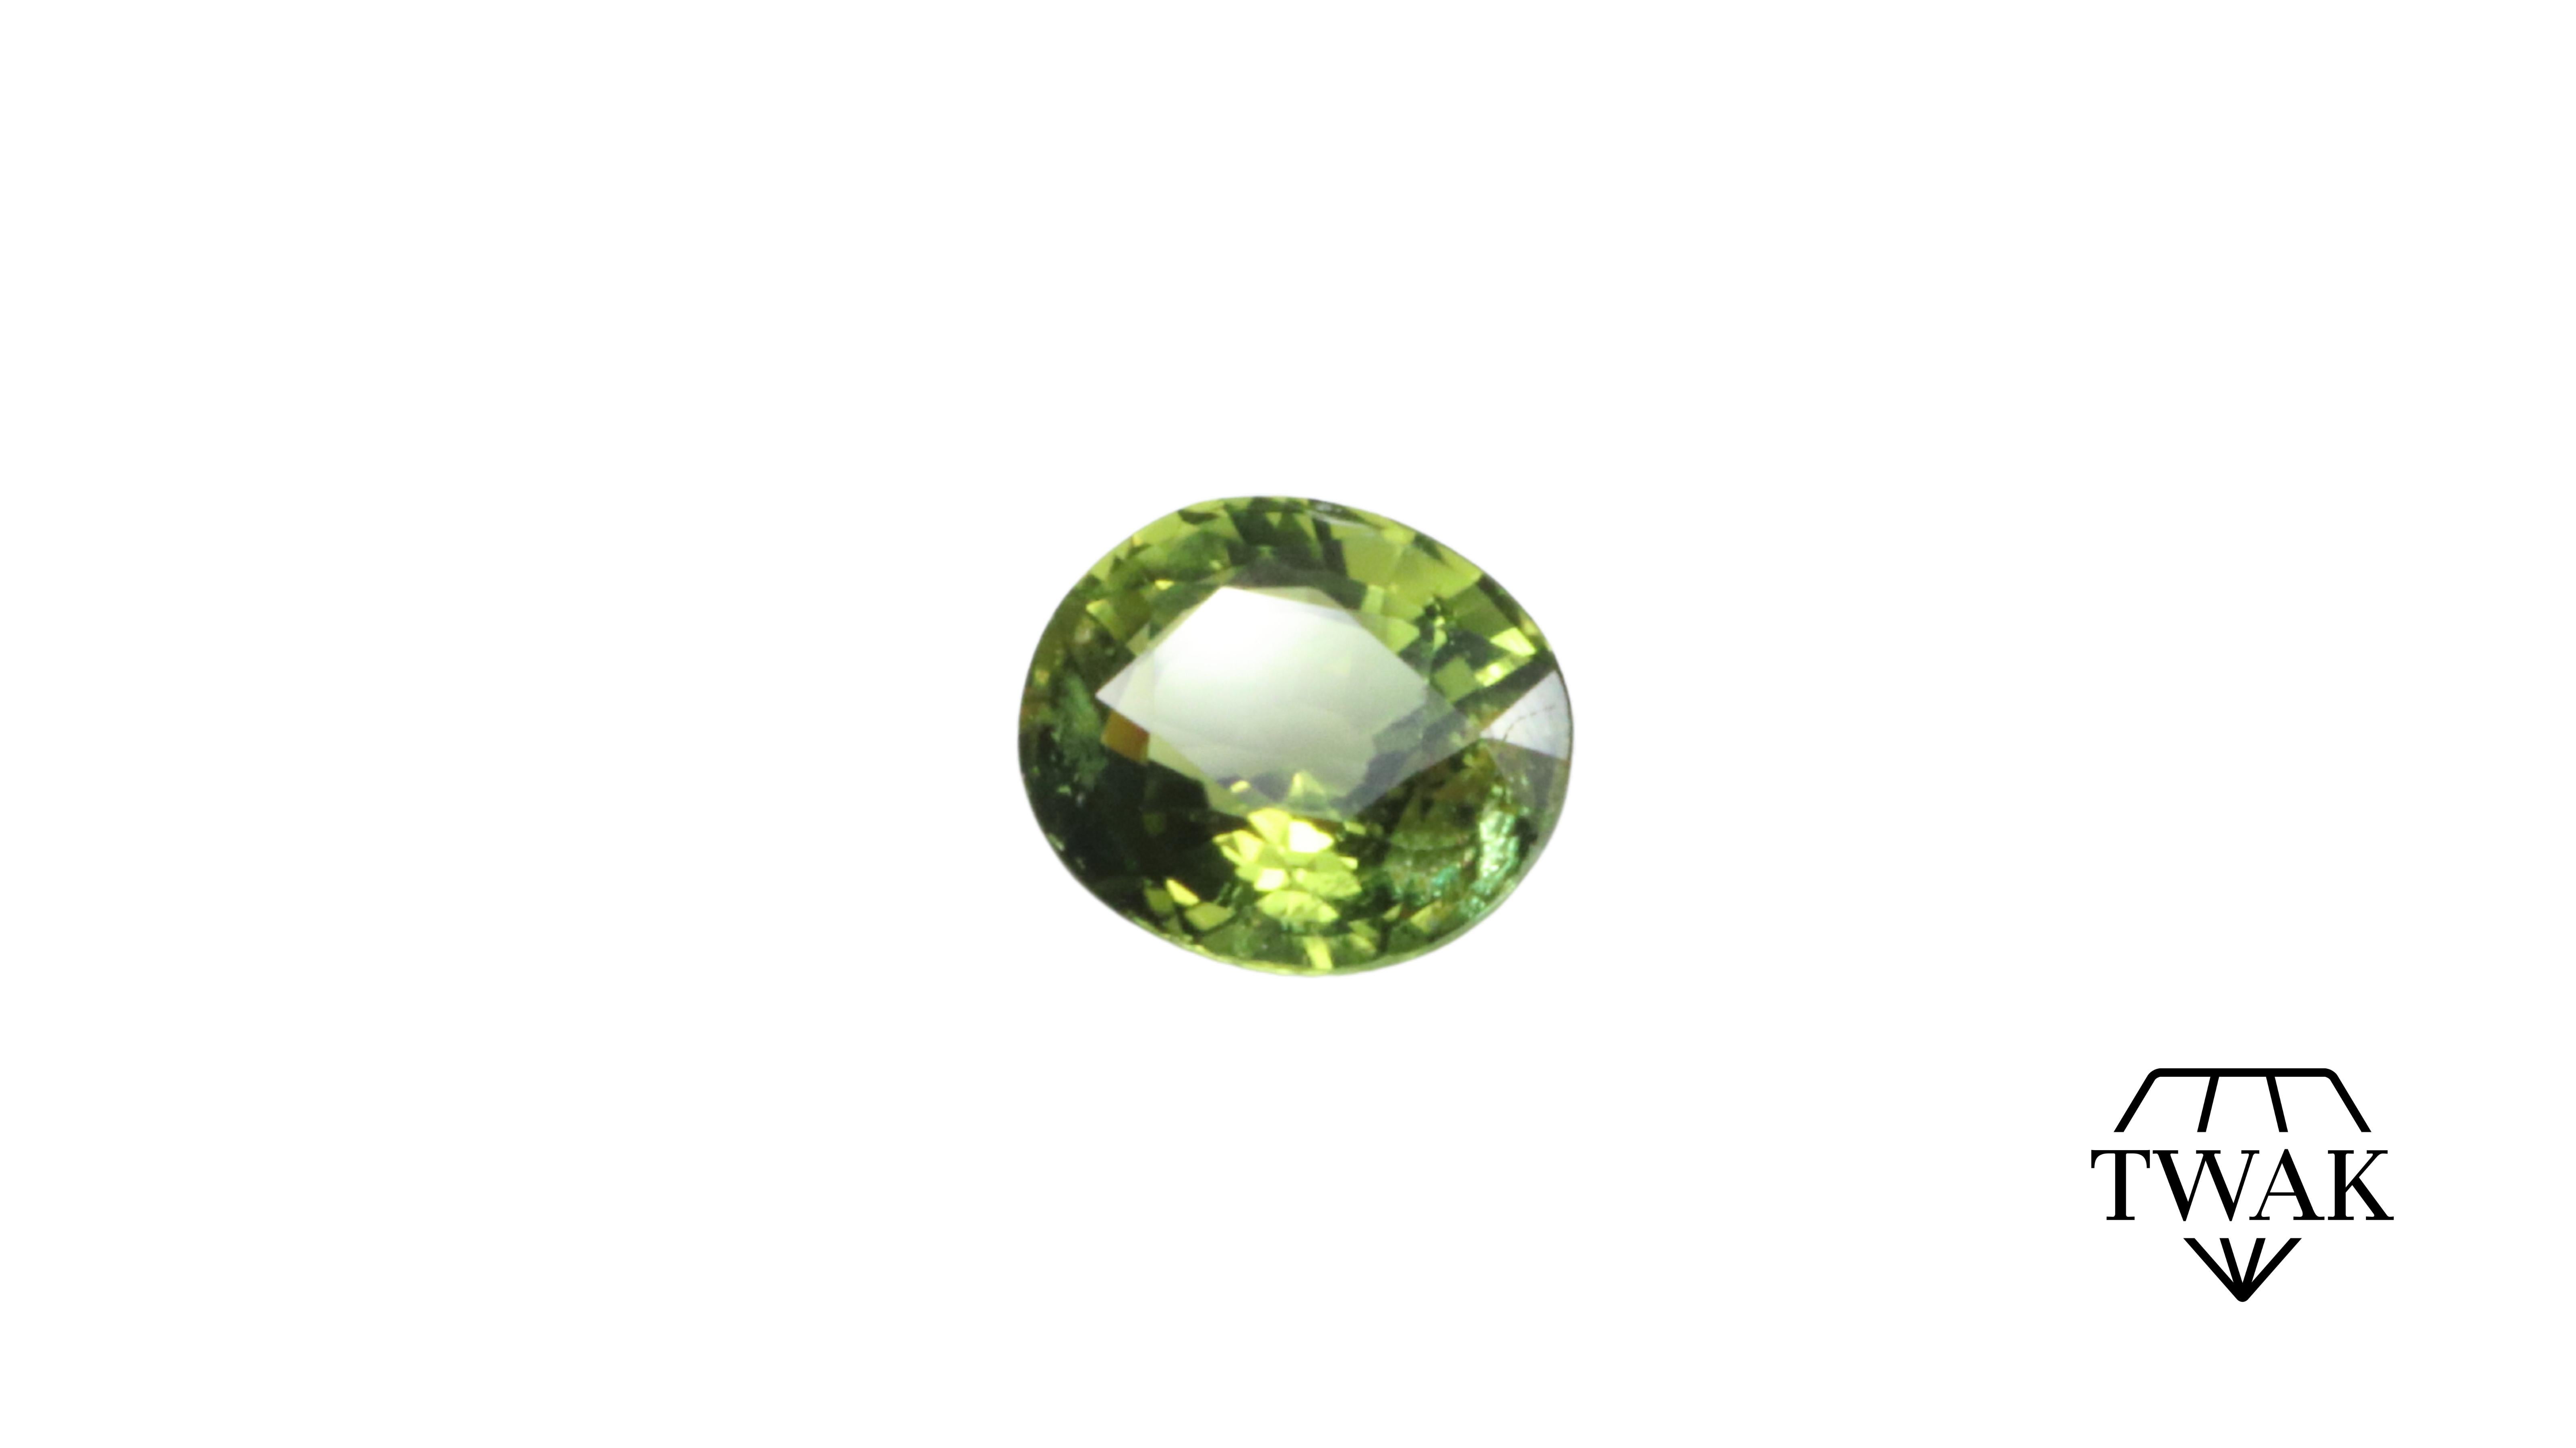 Chrome tourmaline has its color due to the presence of the element chromium, which is the same element that gives the red in ruby and green in emeralds. It may also contain traces of Vanadium and is highly sought after due to its rare